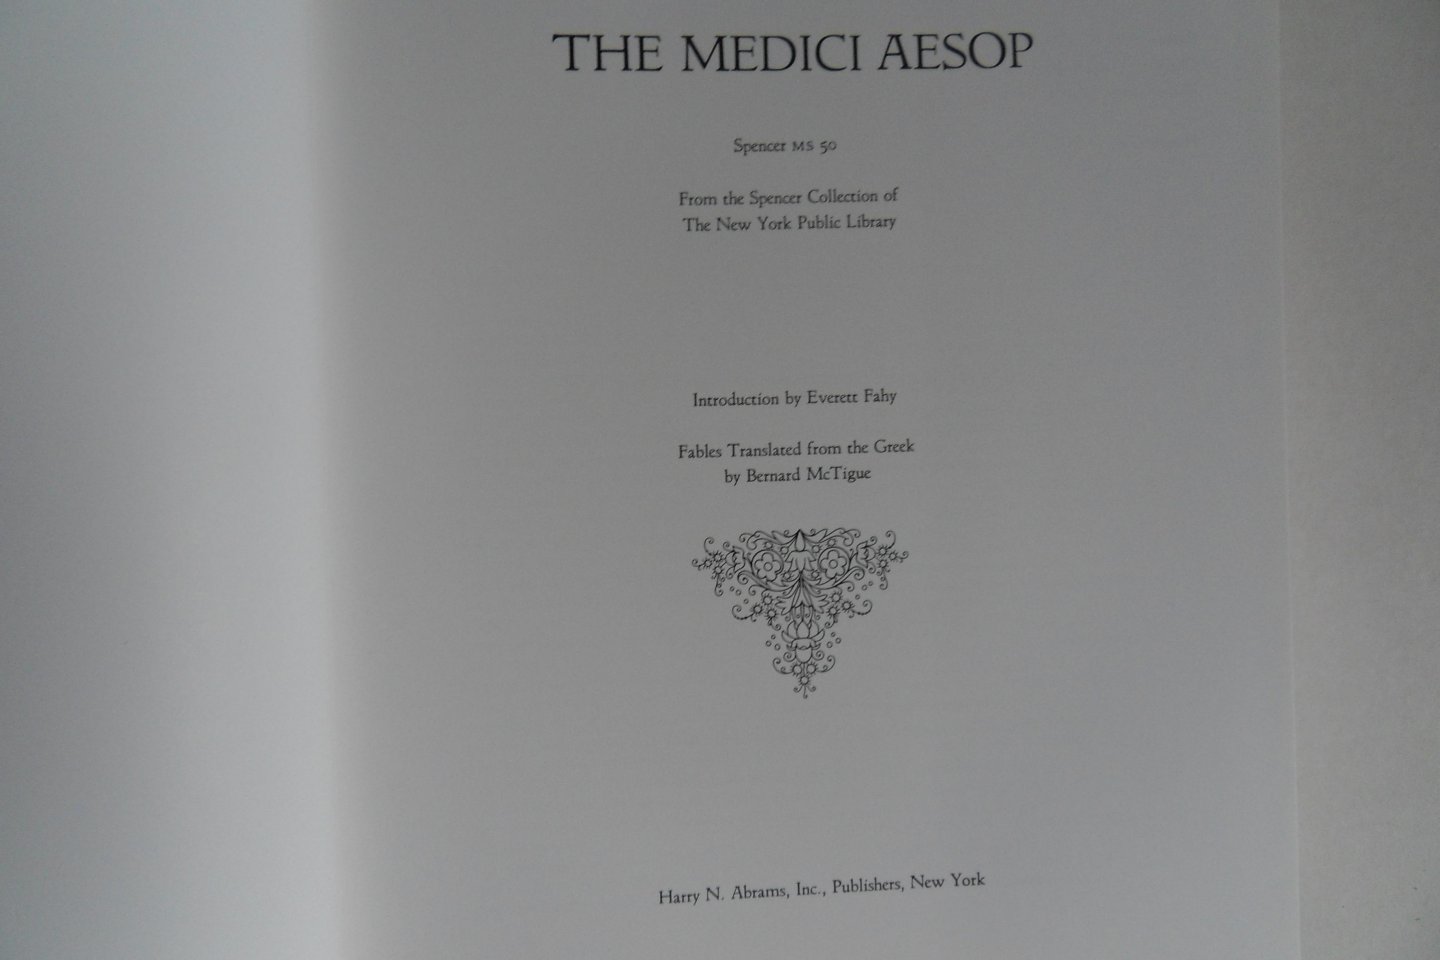 McTigue, Bernard (translated from the Greek); Fahy, Everett (introduction by). - The Medici Aesop. - Spencer MS 50. - From the Spencer Collection of the New York Public Library.